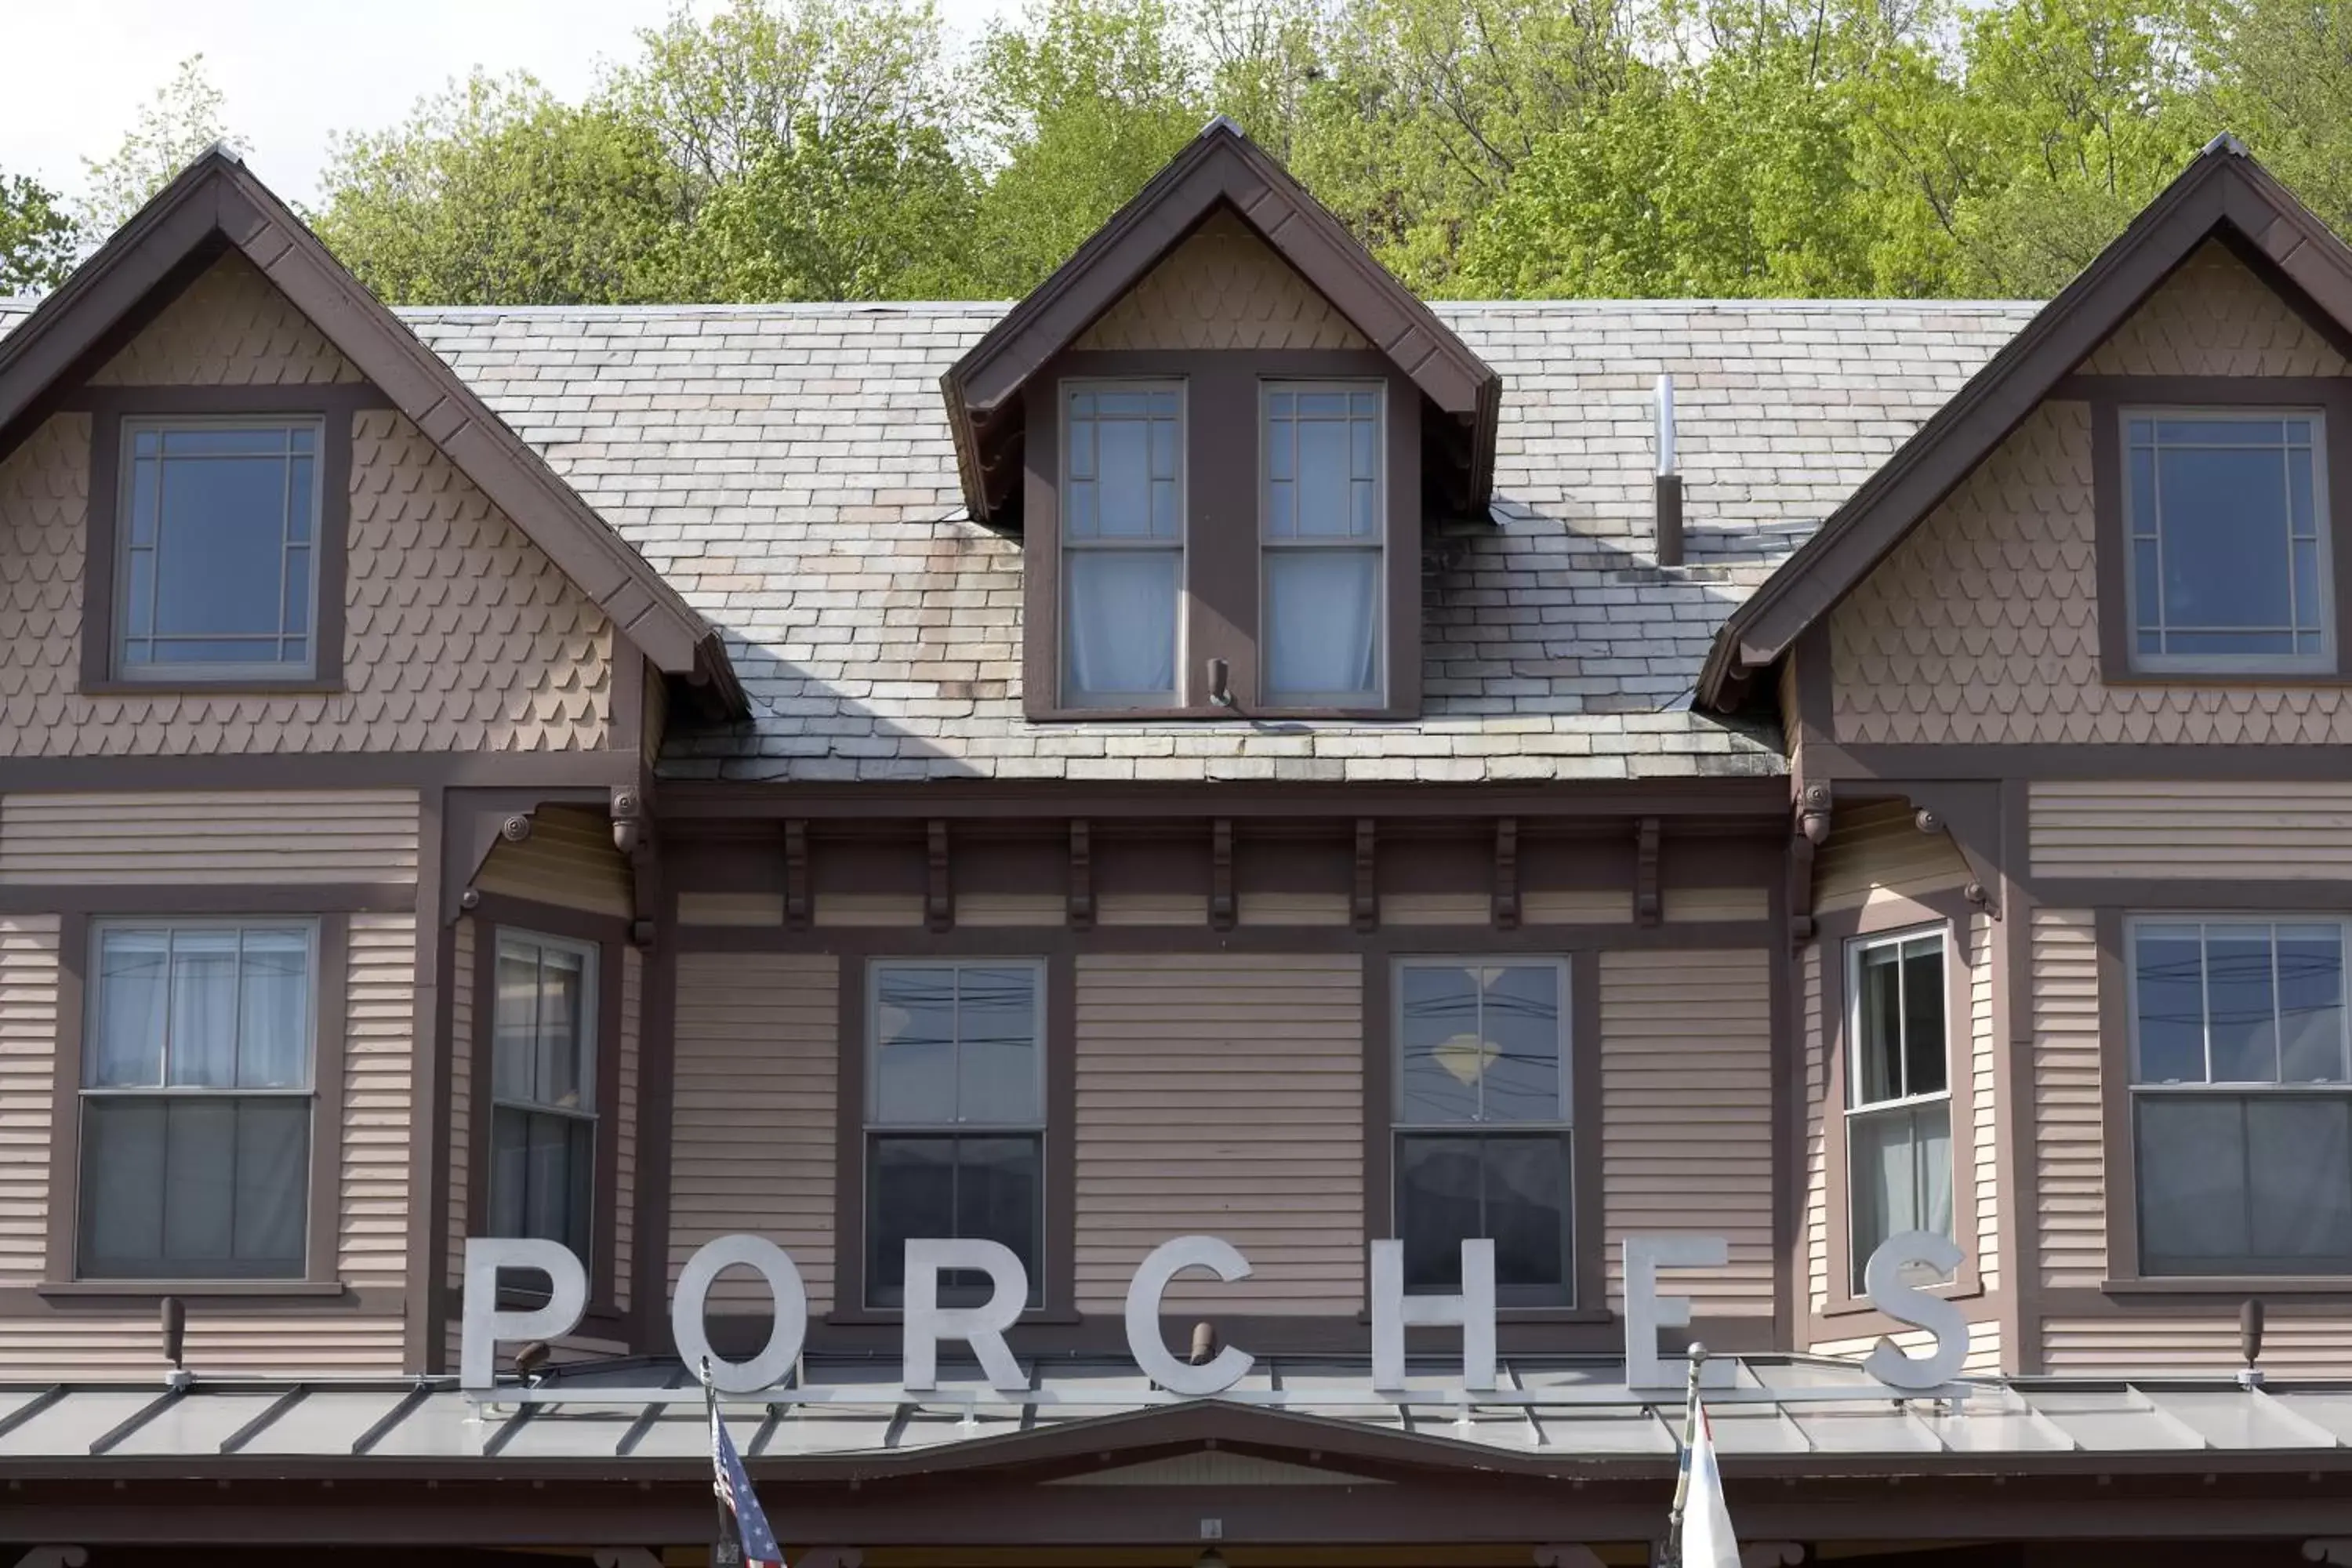 Property Building in The Porches Inn at Mass MoCA